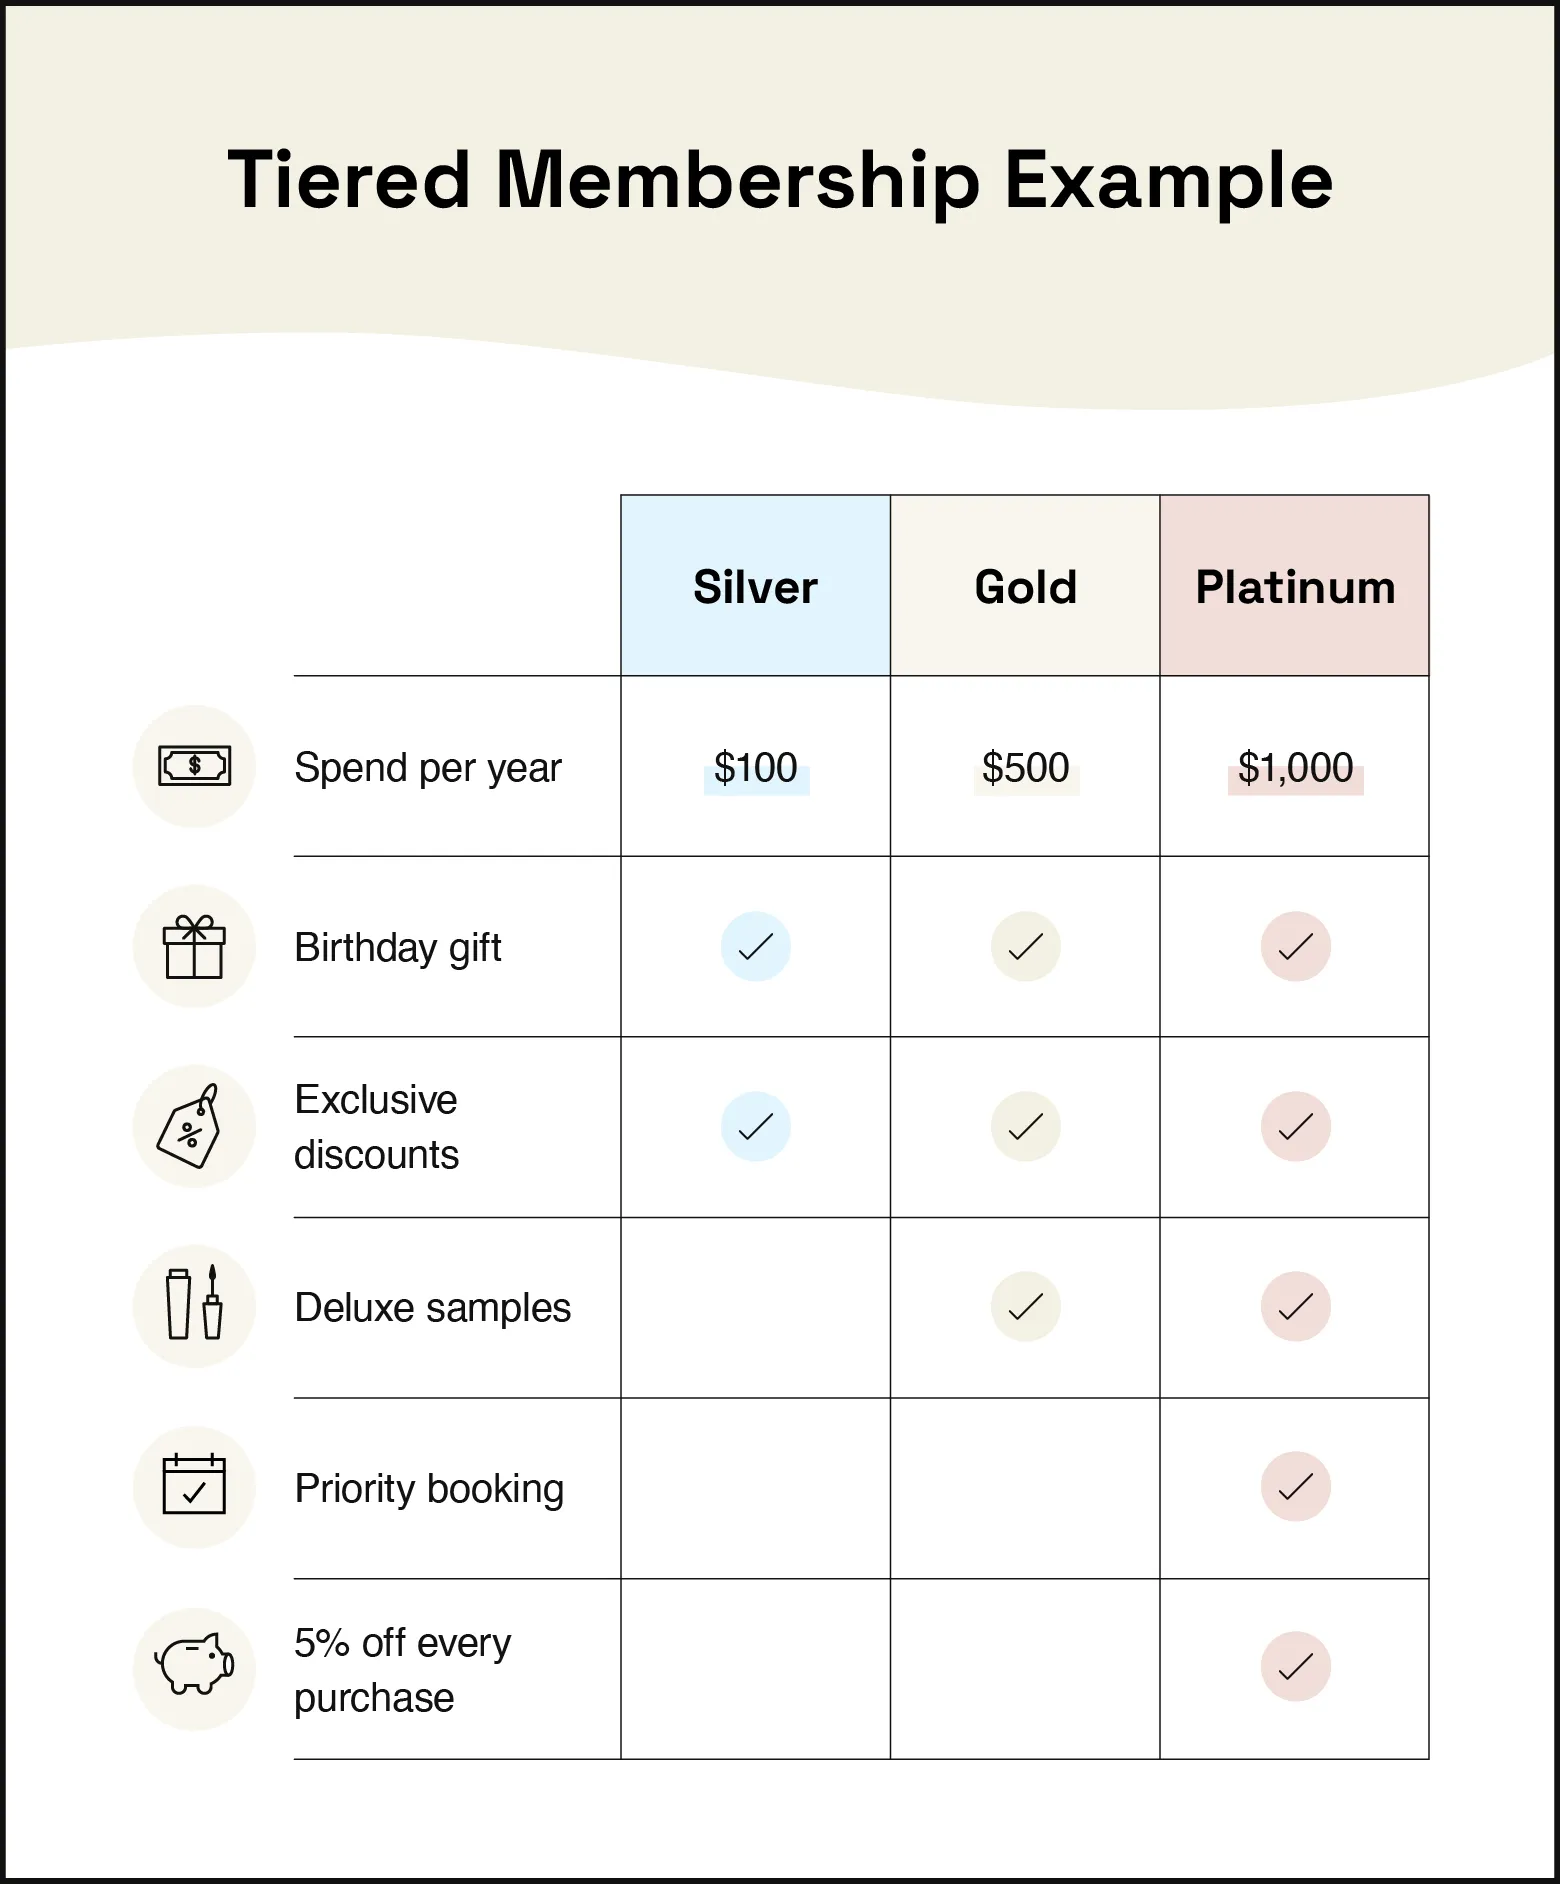 Chart depicts example rewards for a tiered points-based system at a salon.